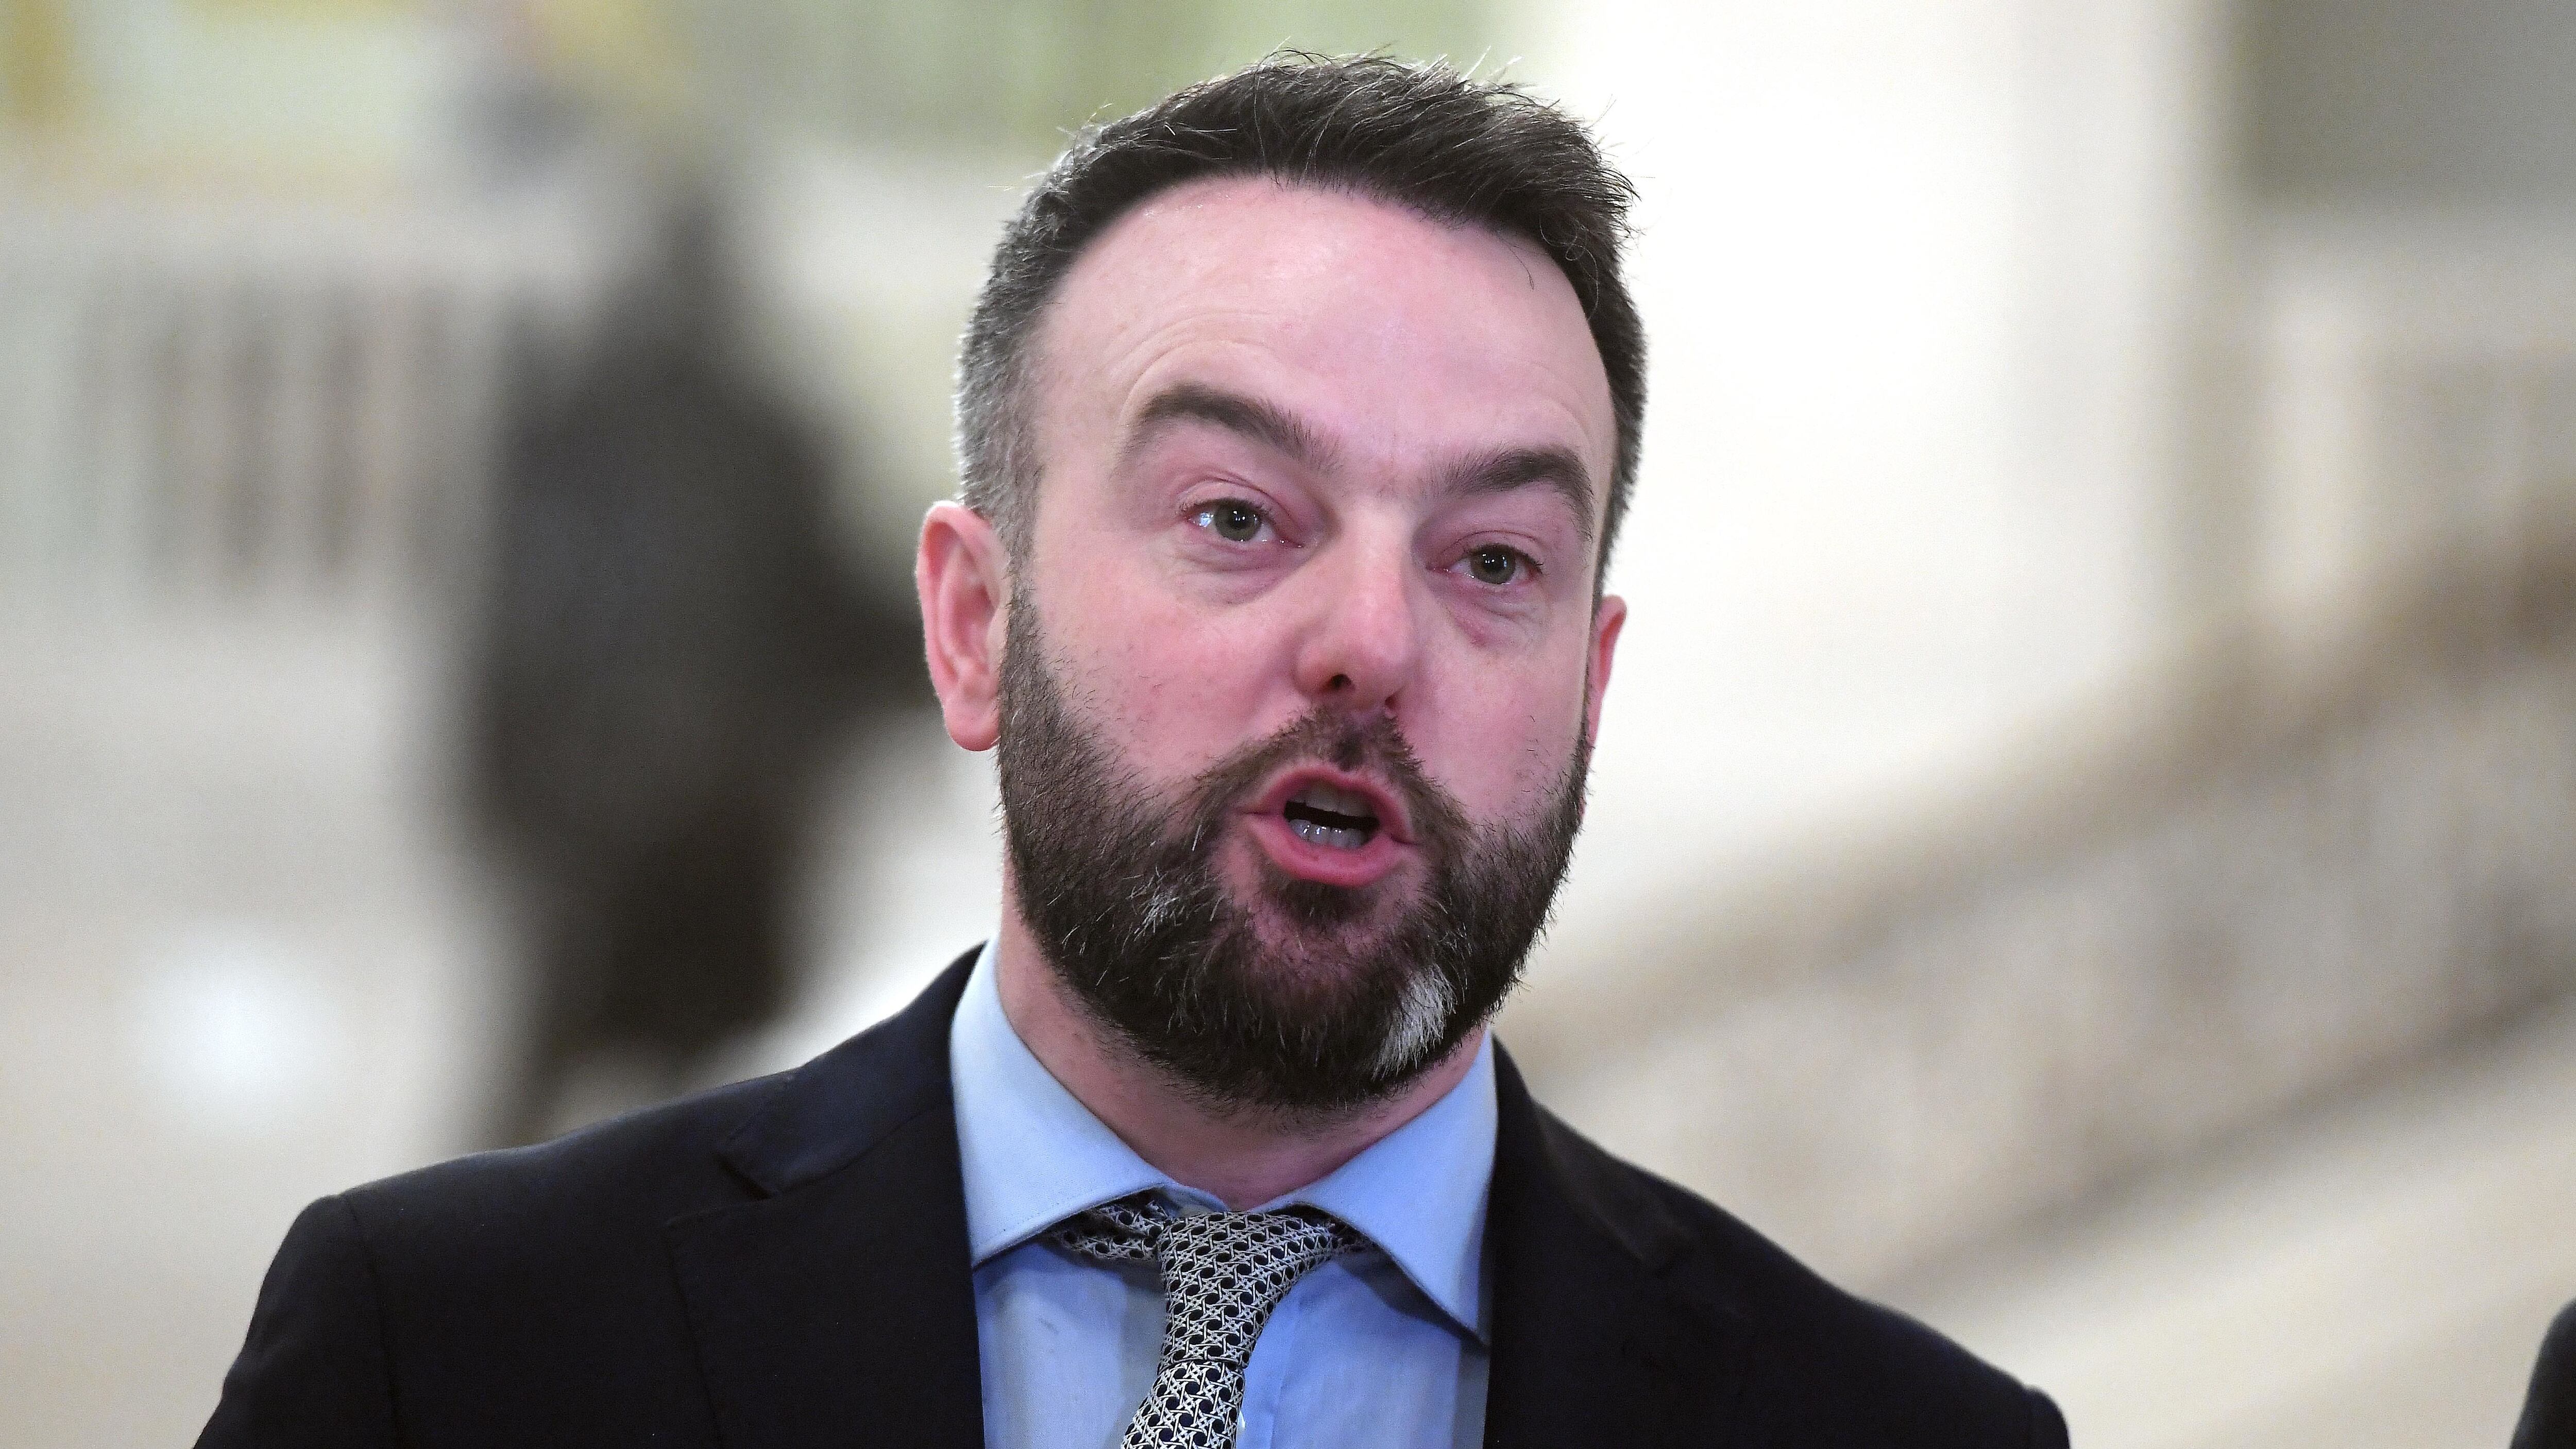 SDLP leader Colum Eastwood criticised the online abuse suffered by Lilian Seenoi-Barr